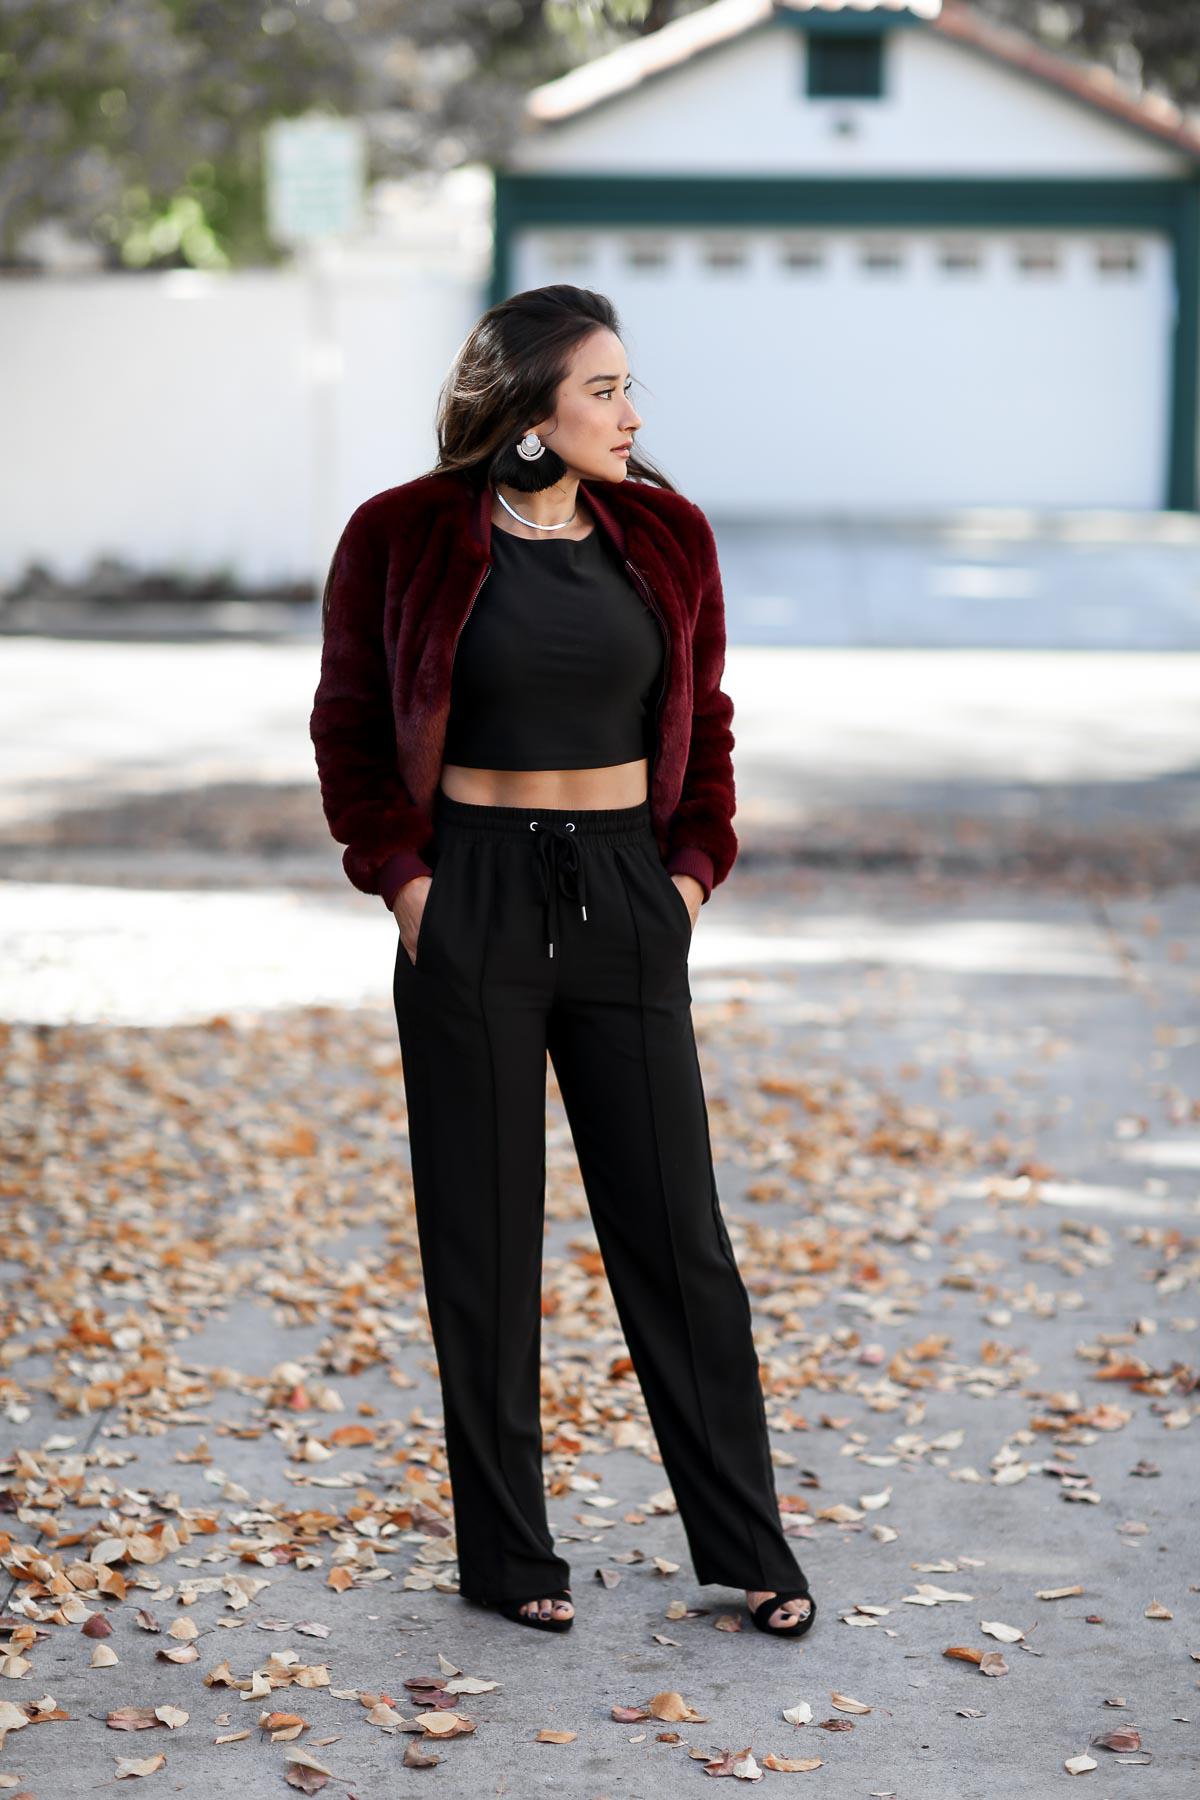 stiletto-confessions-hm-track-pants-forever21-bomber-44